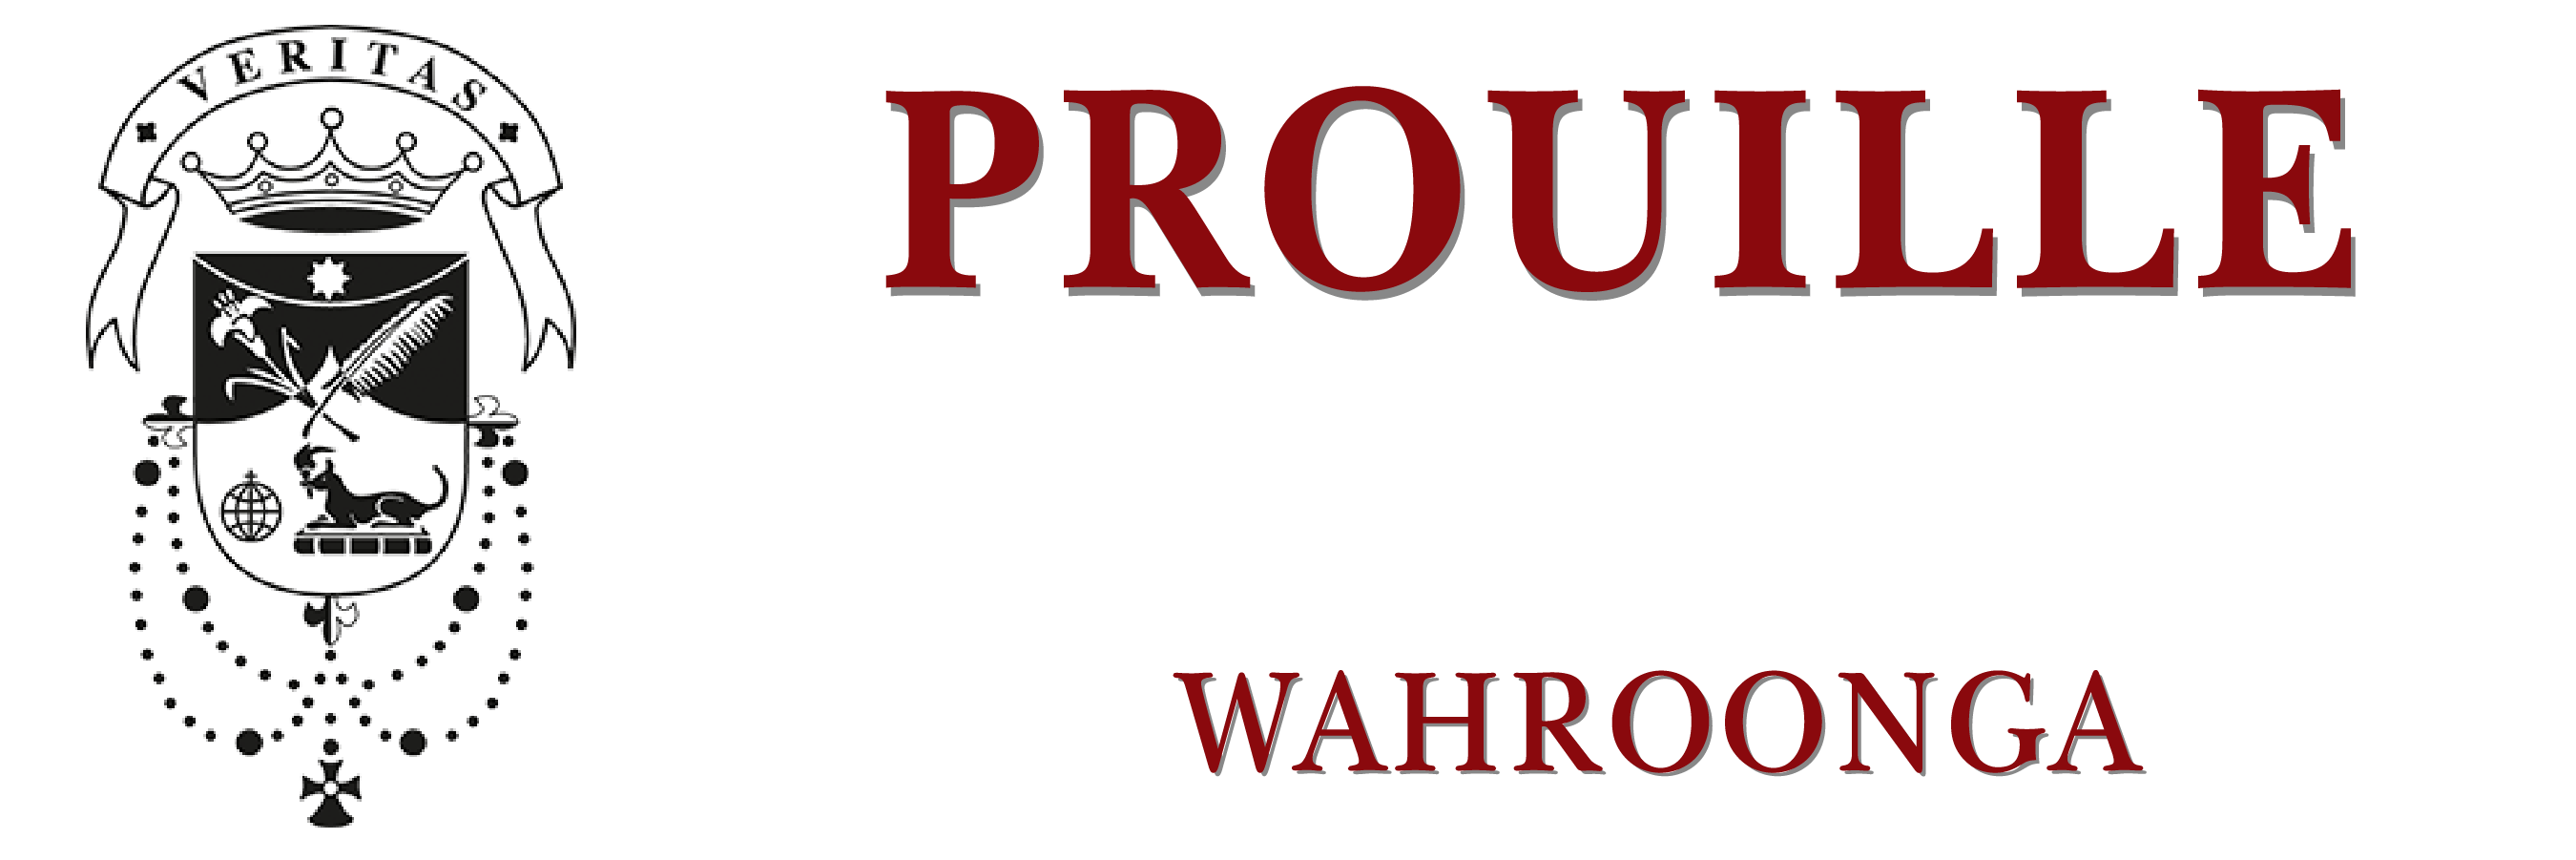 Prouille, Wahroonga